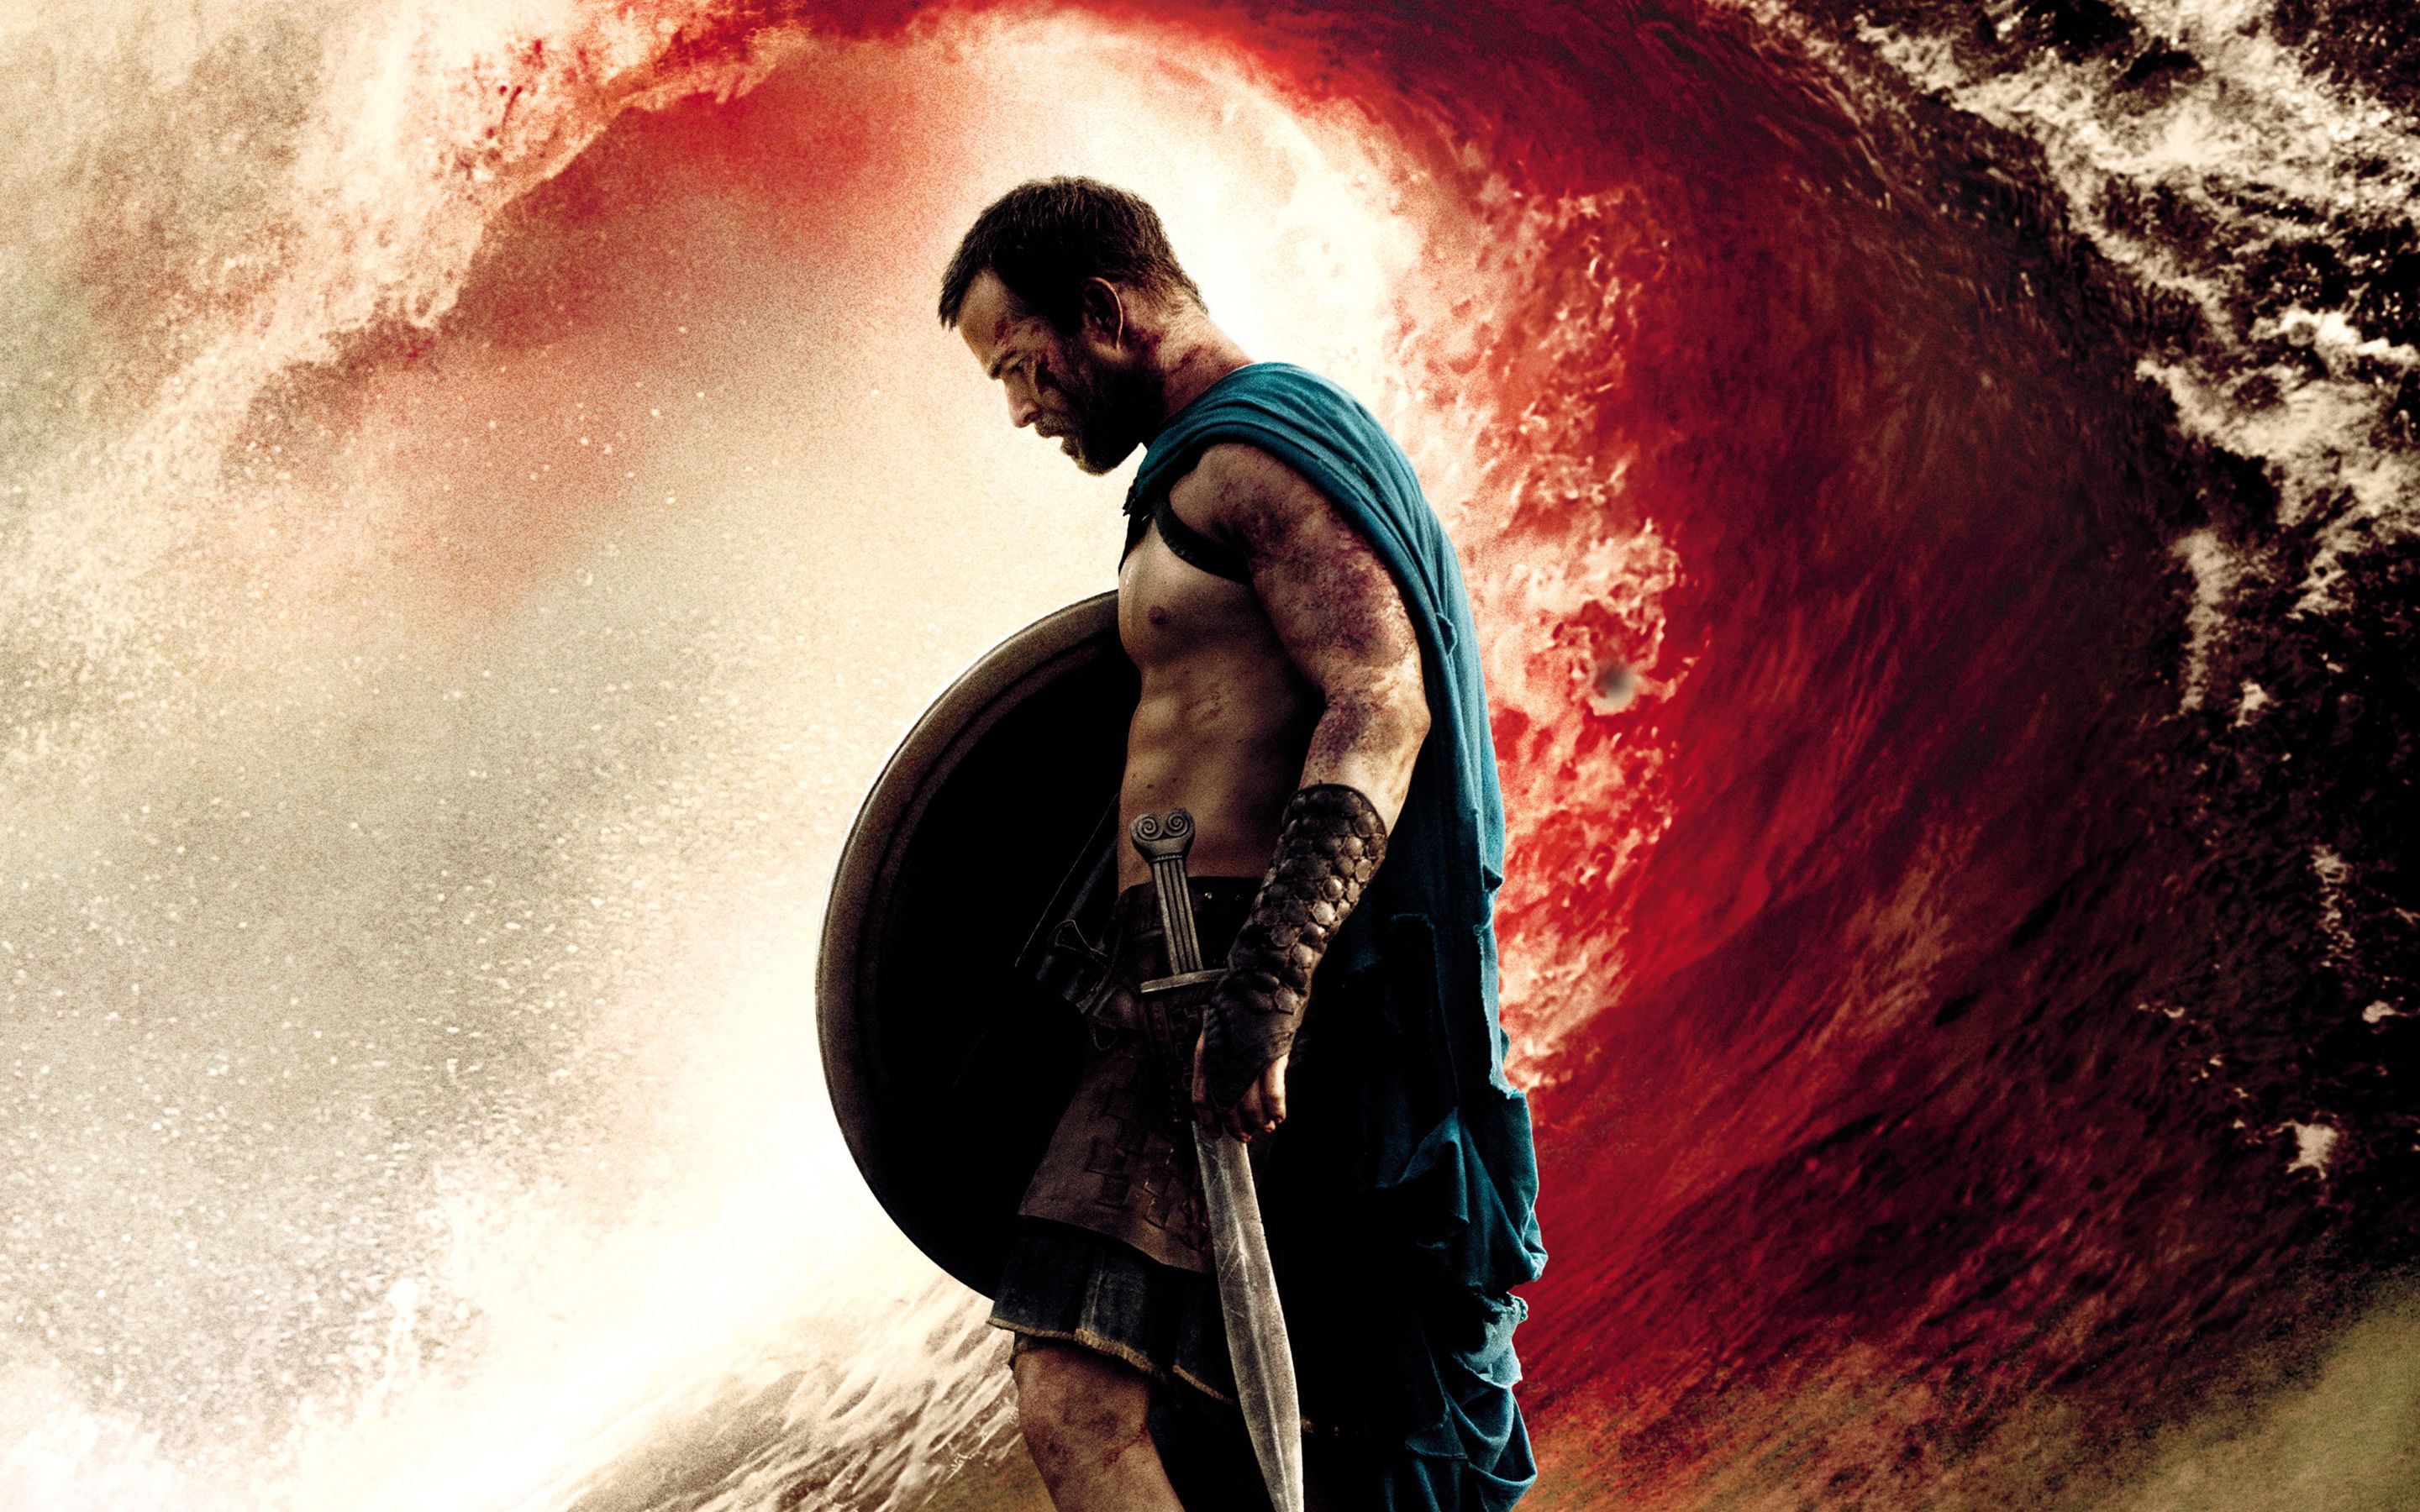 2014 300 Rise of an Empire Wallpapers | HD Wallpapers